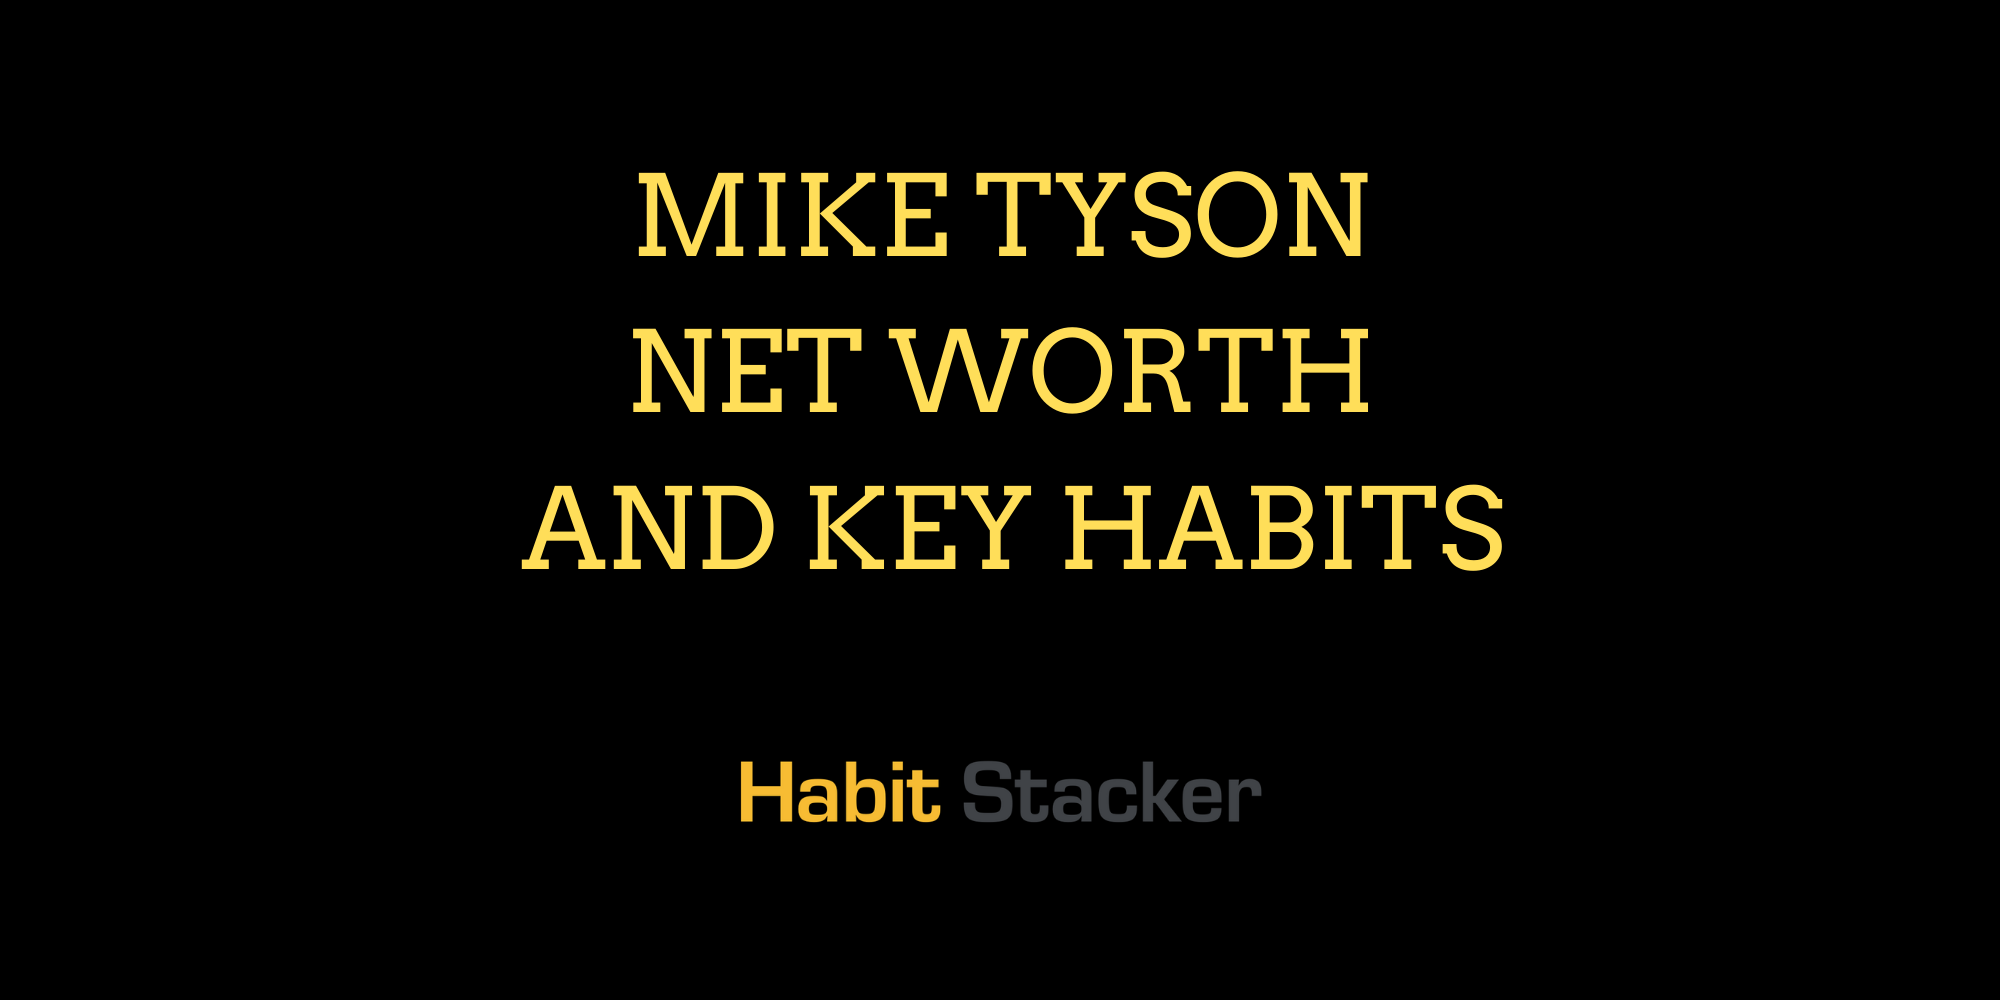 Mike Tyson Net Worth and Key Habits